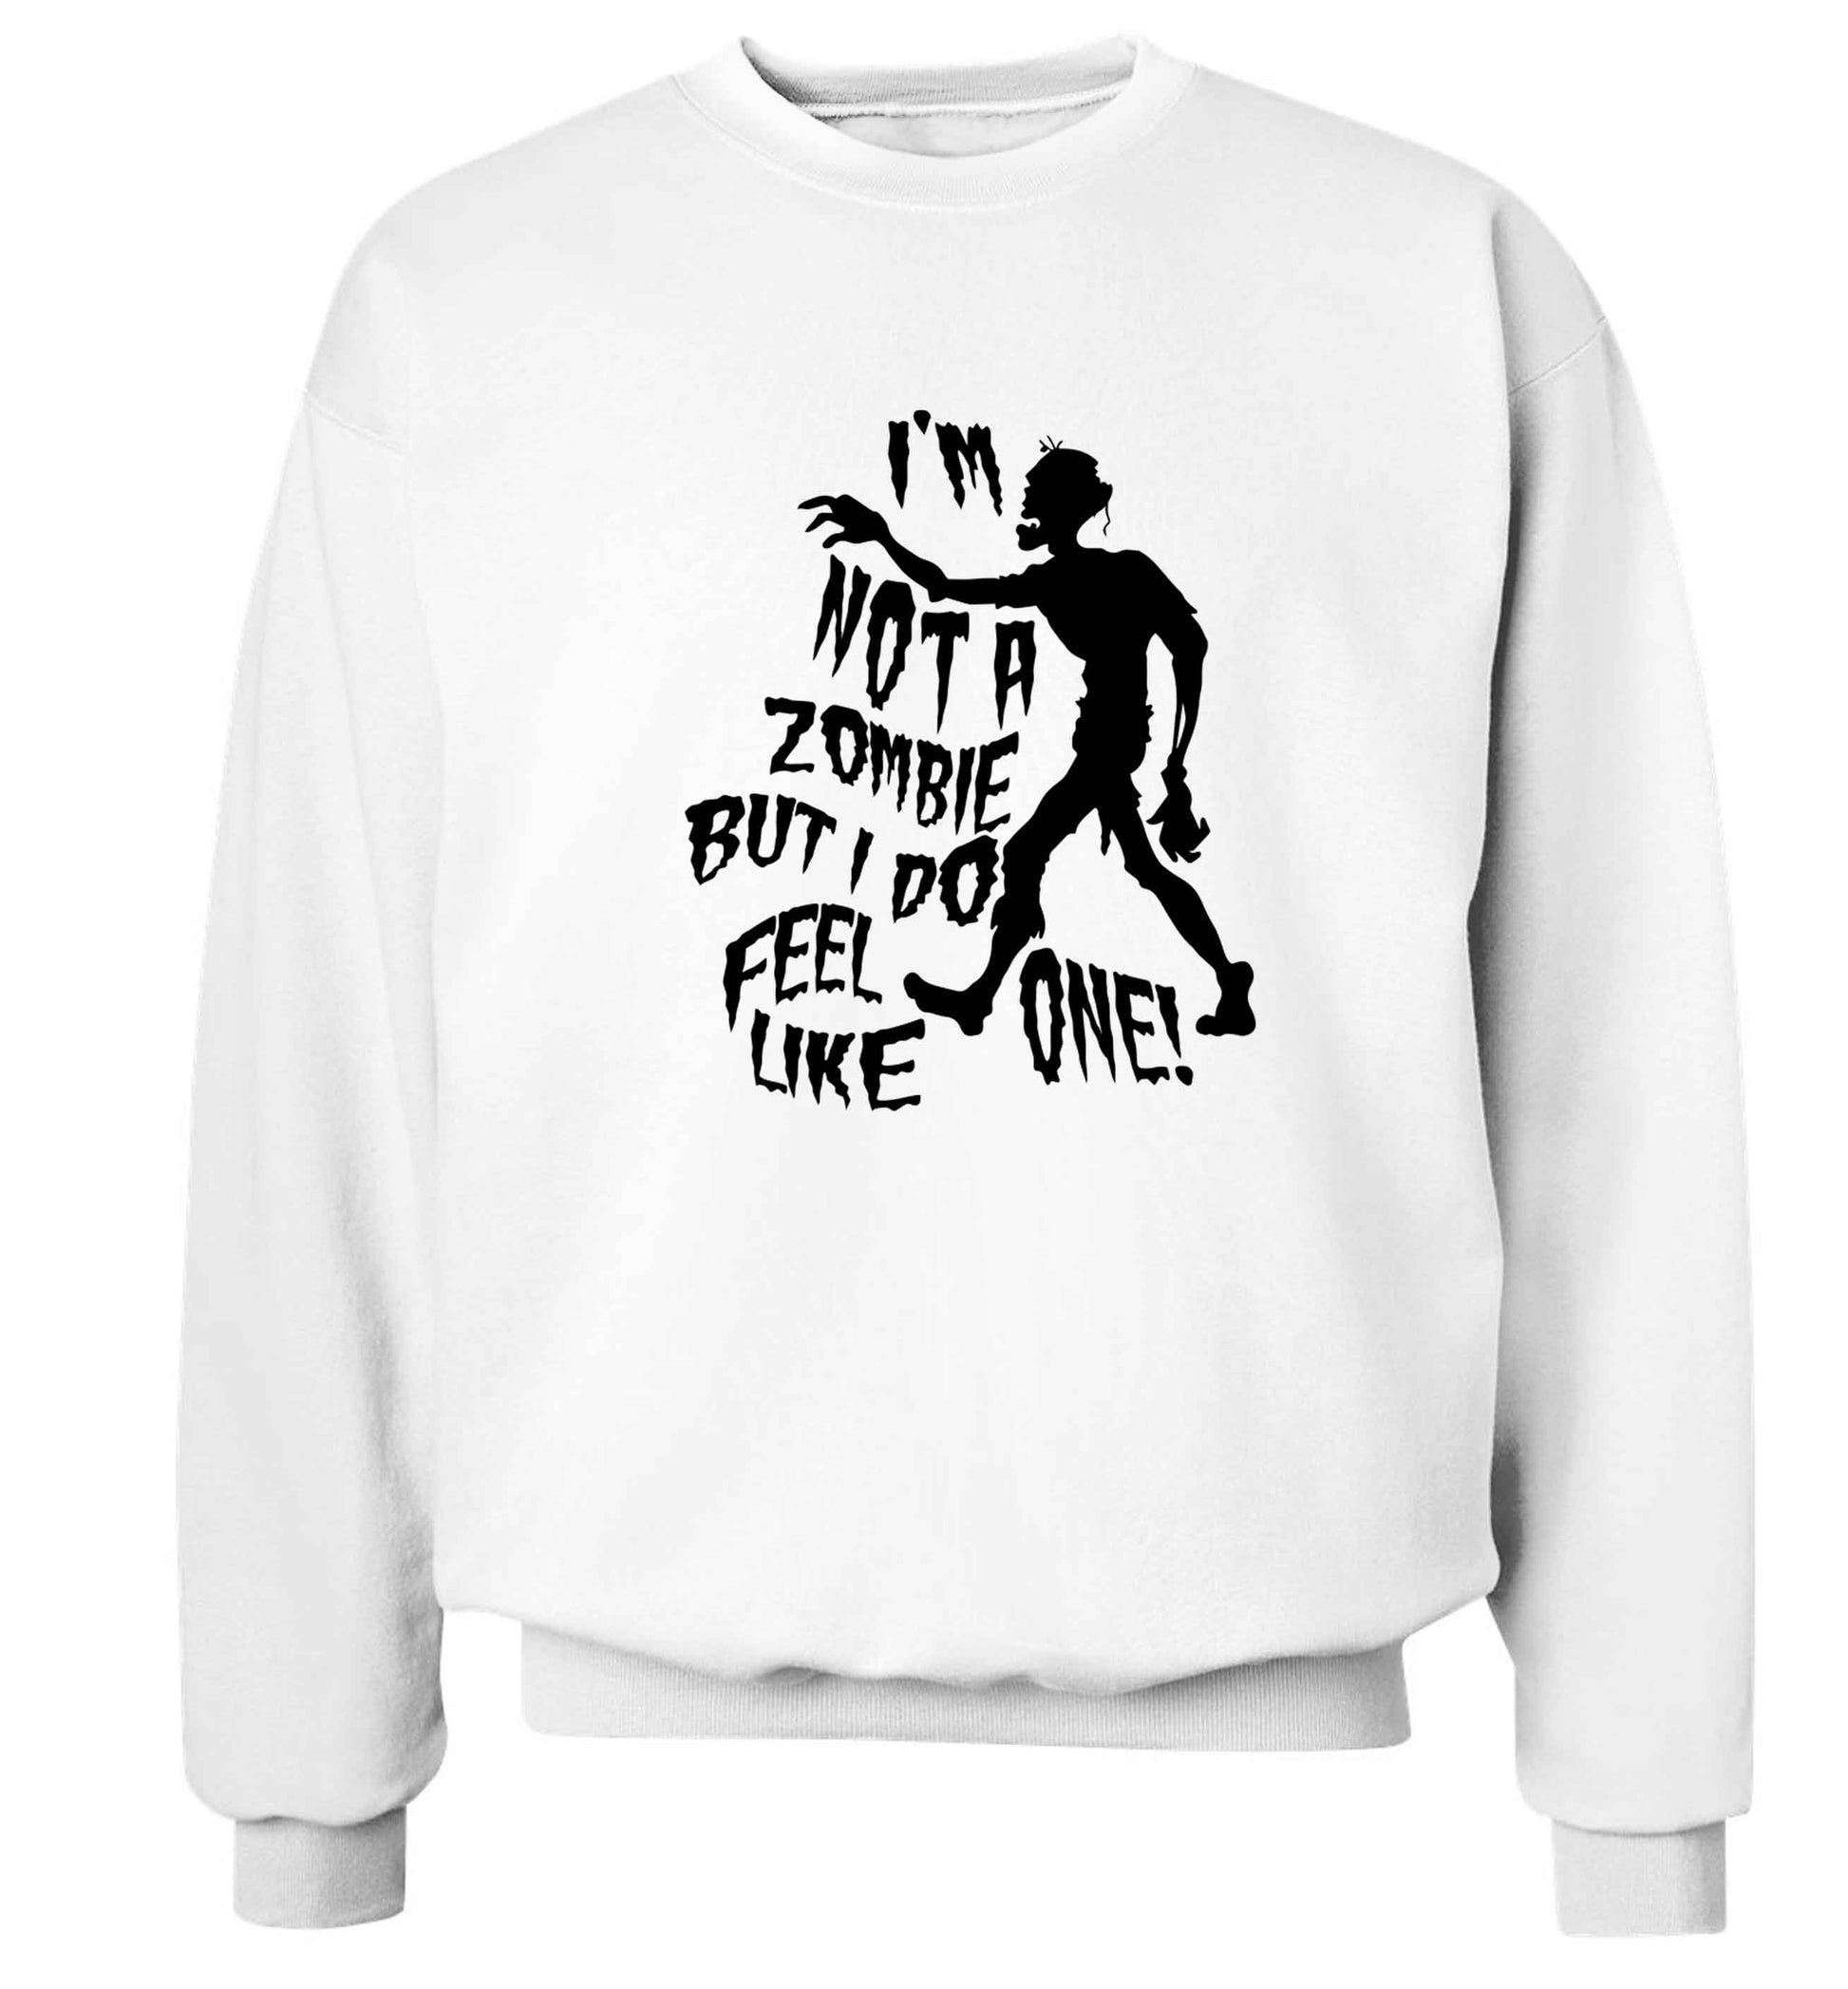 I'm not a zombie but I do feel like one! Adult's unisex white Sweater 2XL